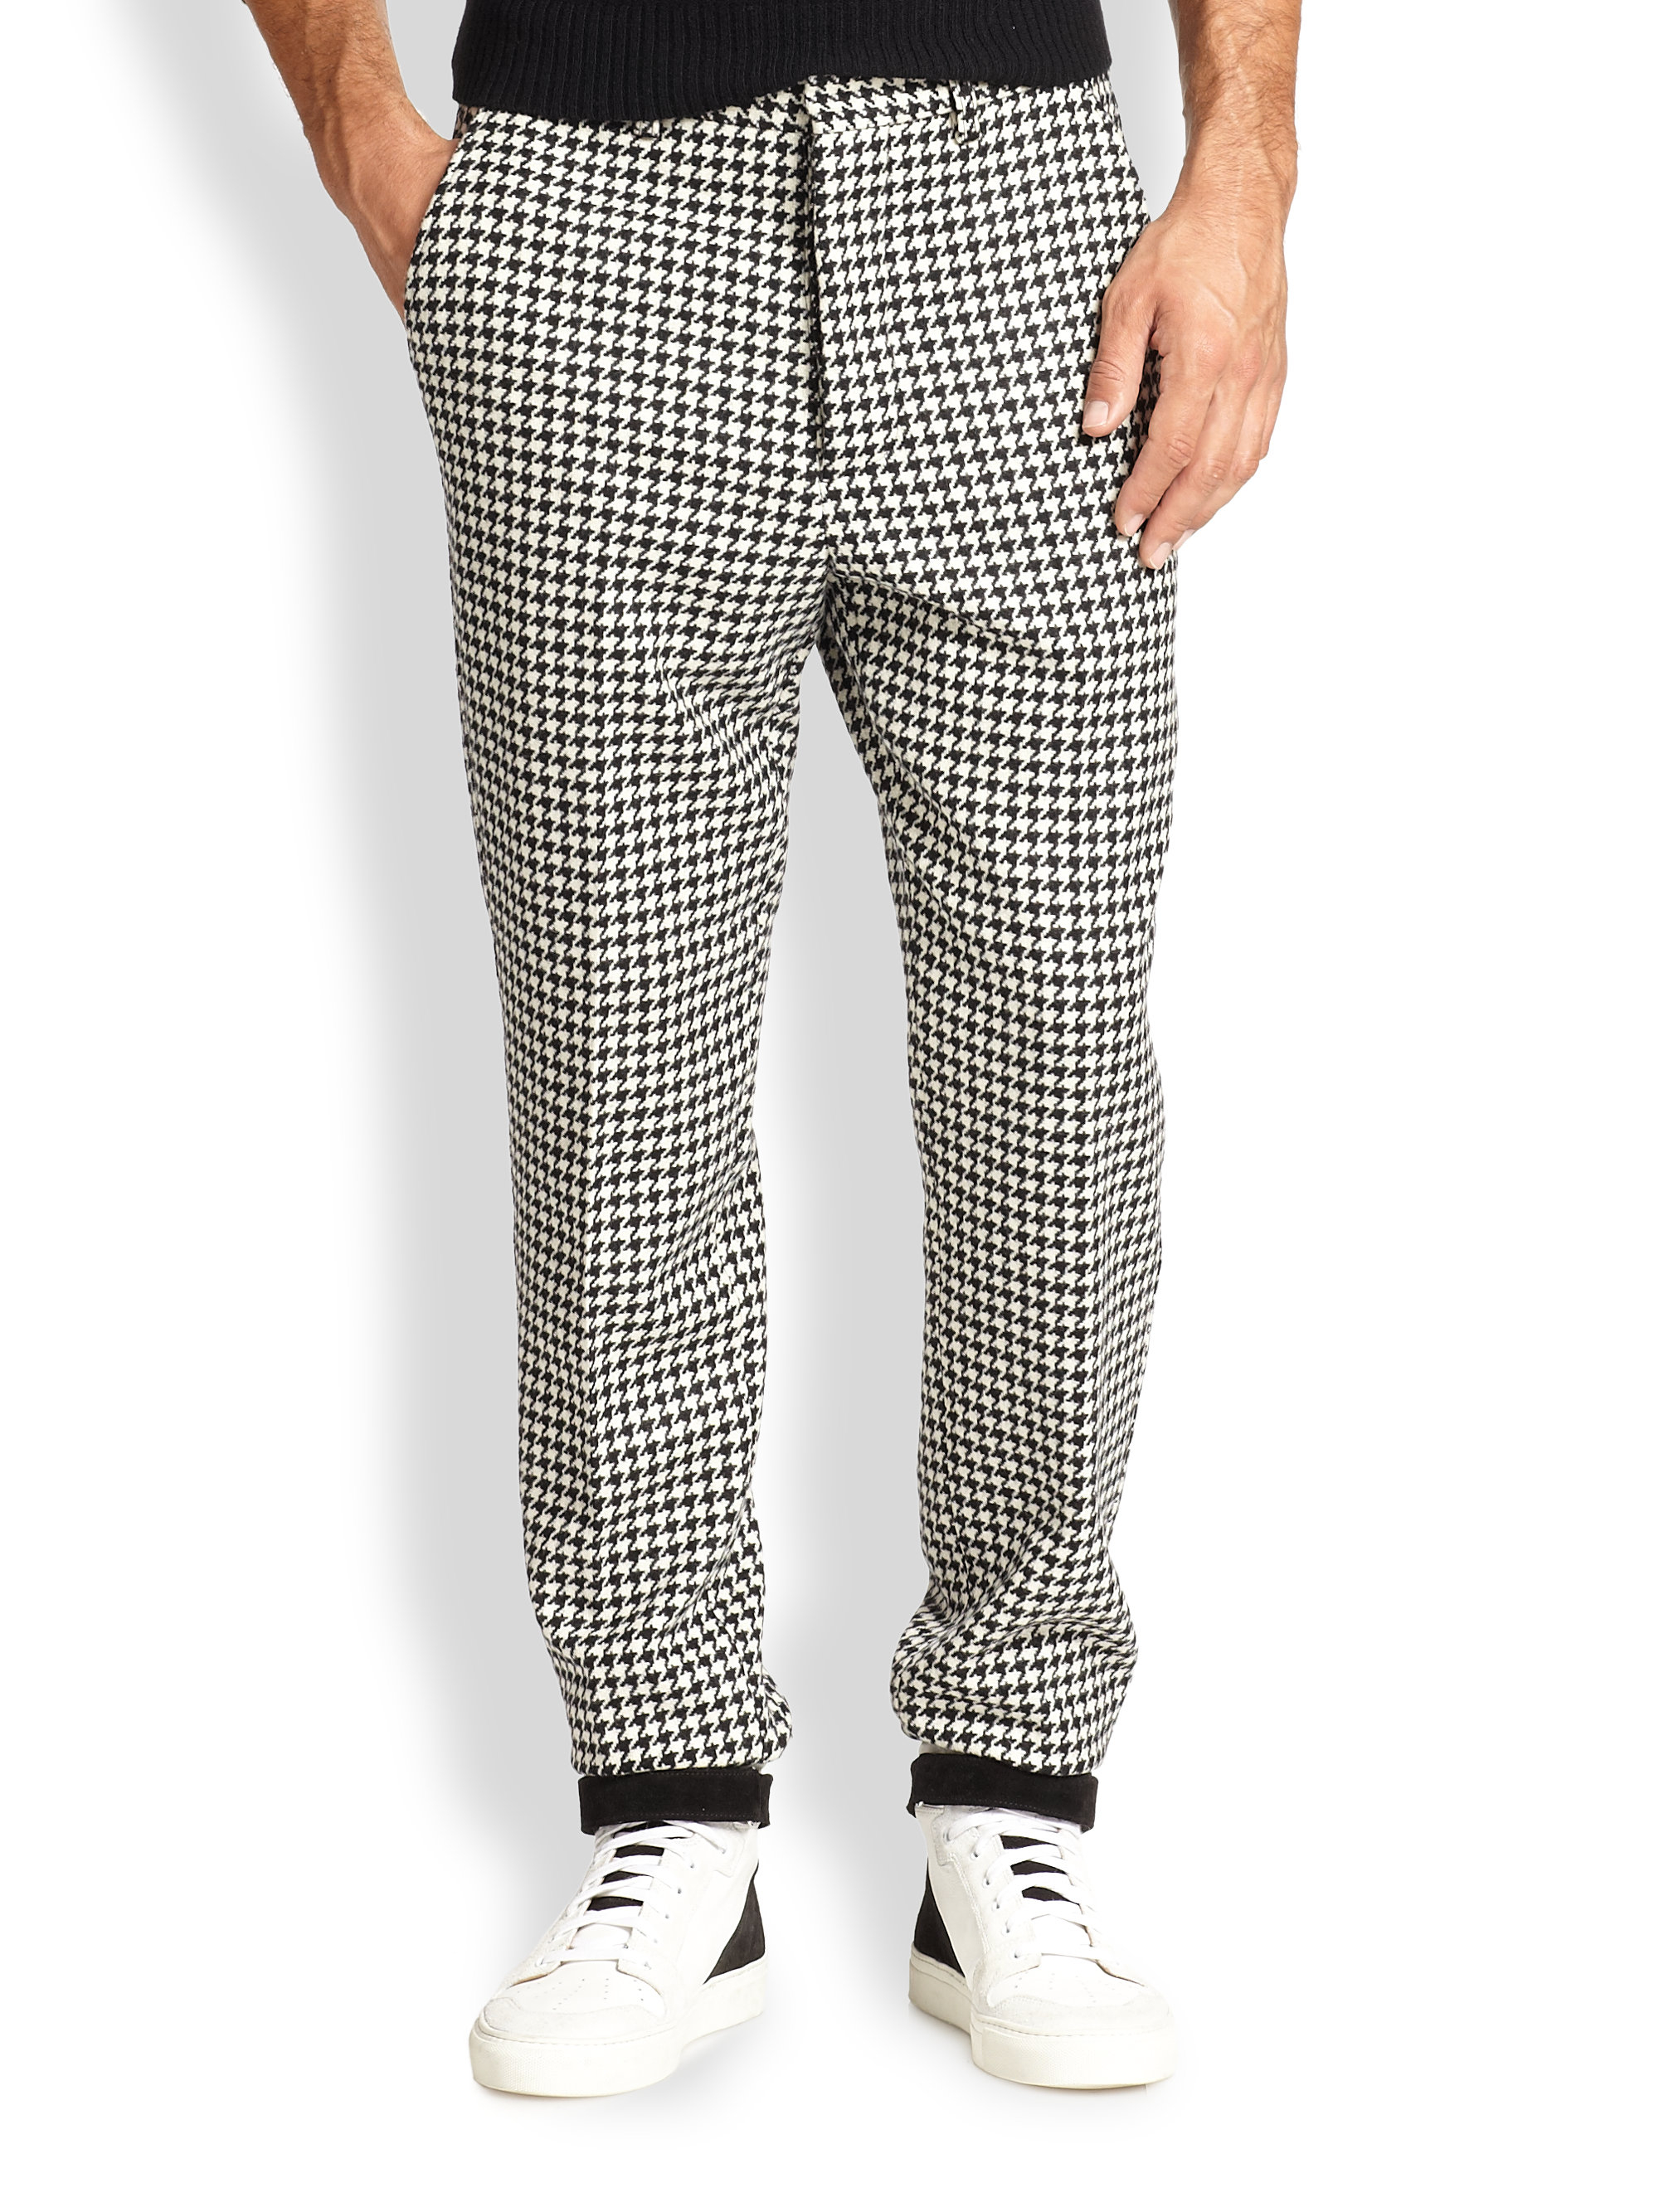 Ami Black Wool Houndstooth Trousers Product 1 21741862 3 656939449 Normal 